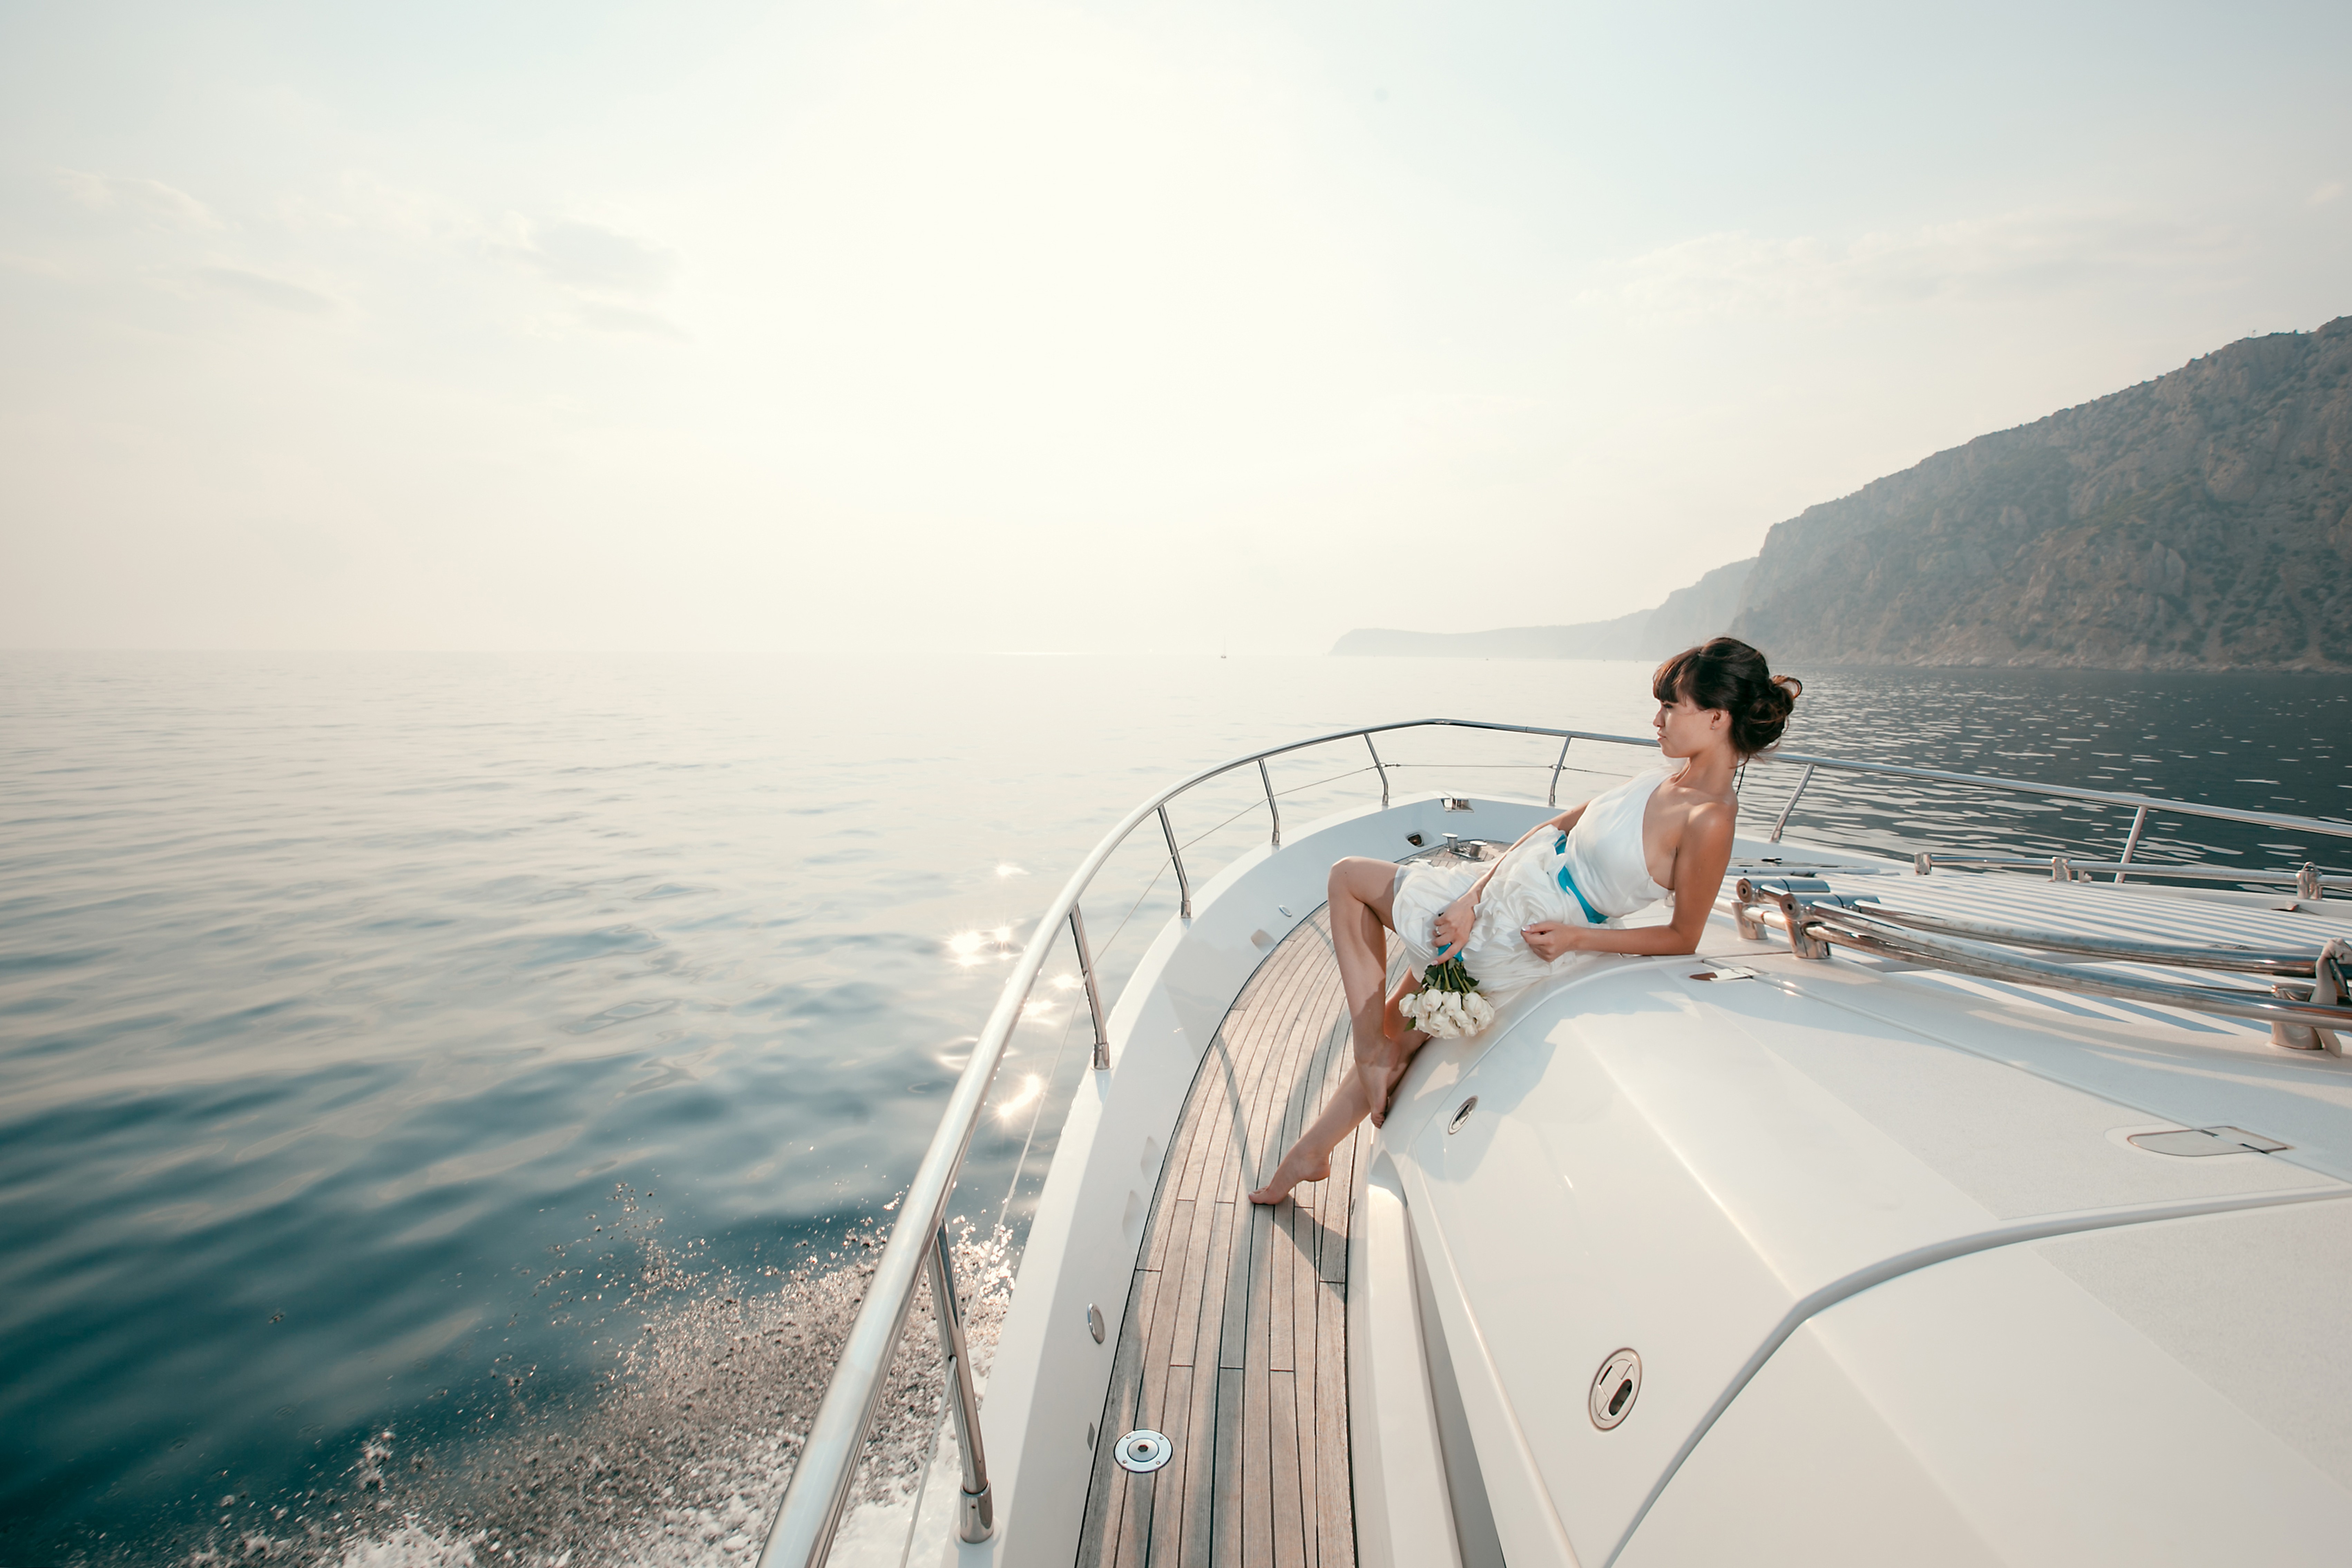 People 6810x4540 women women with boats brunette white dress barefoot bouquets looking into the distance sea bare shoulders yacht vehicle sky model women outdoors water